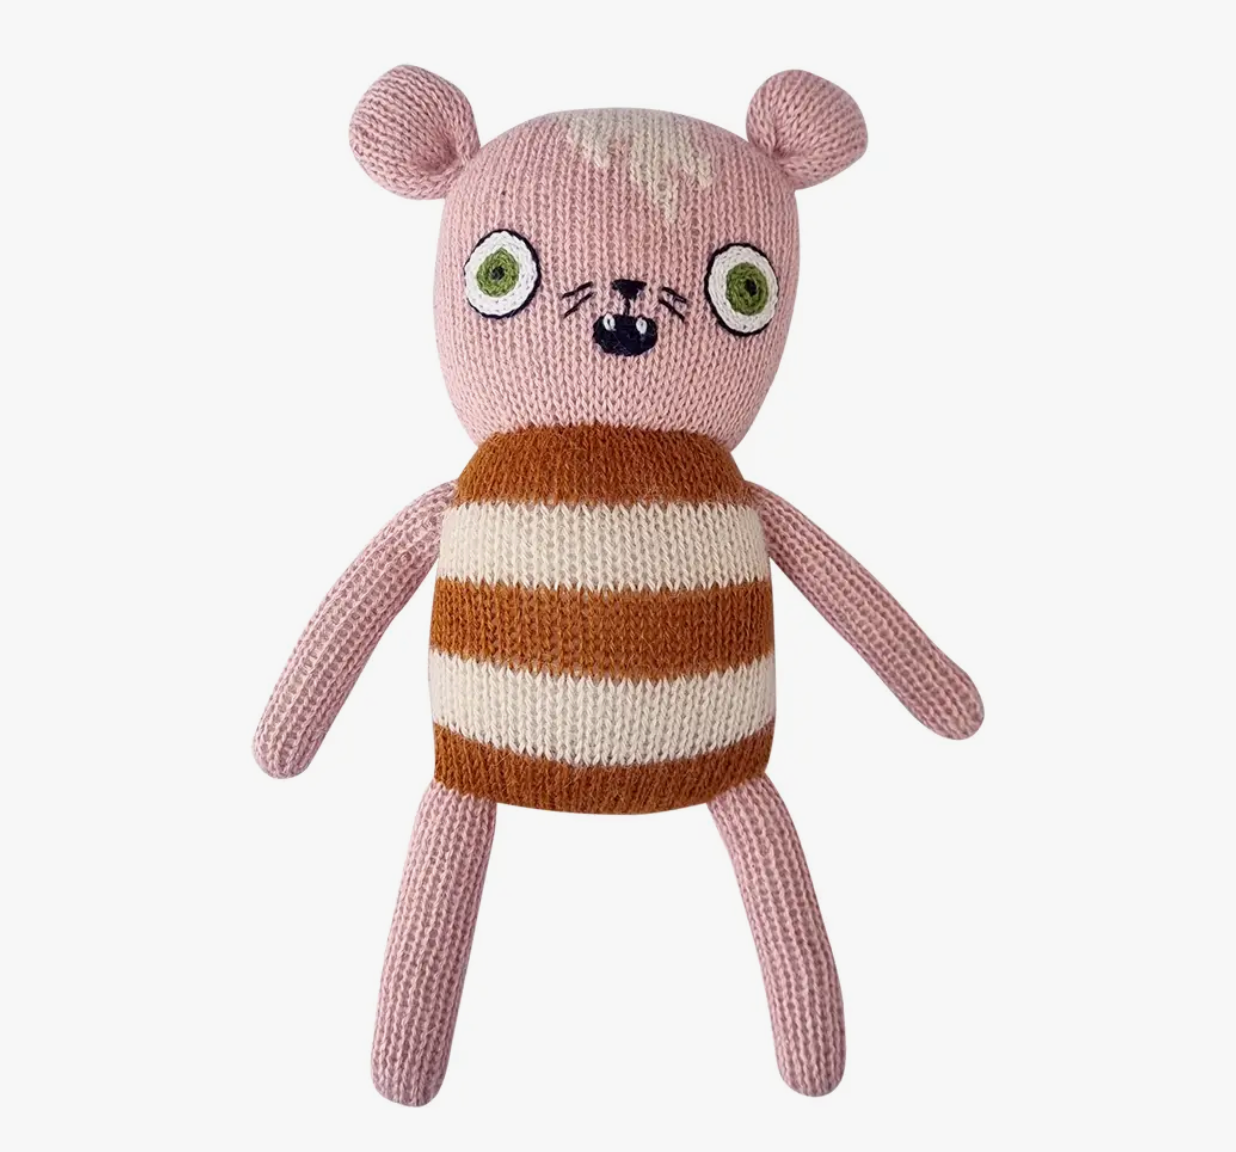 Rose knitted ‘Tiger Soft Toy’ with terracotta stripes.